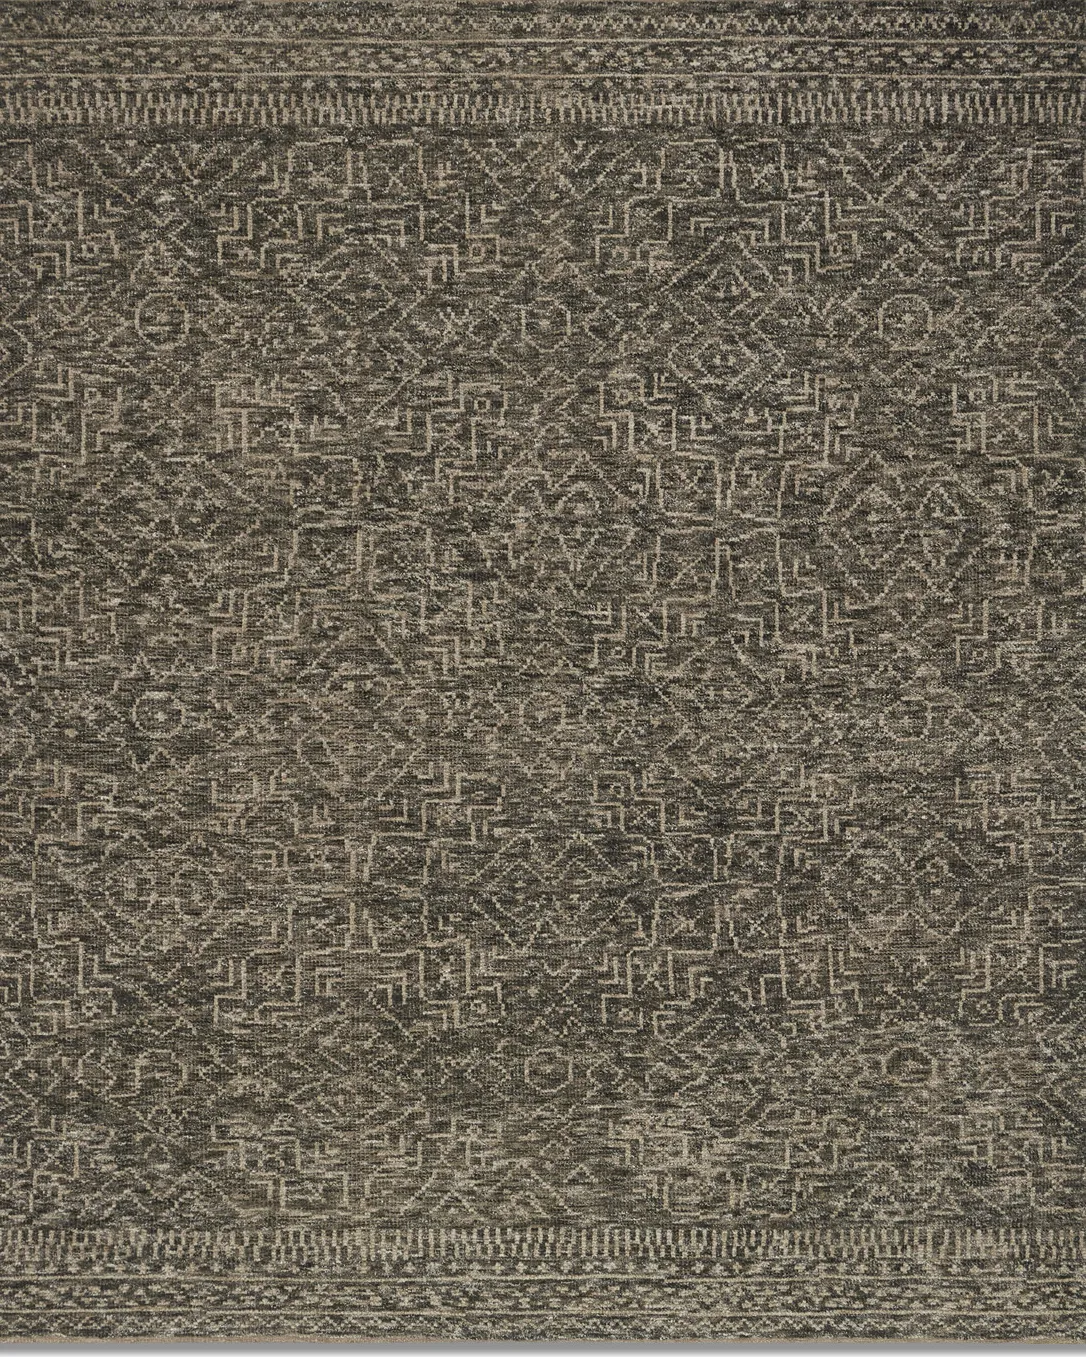 Odyssey Charcoal Taupe Area Rug - 7 9  x 9 9  